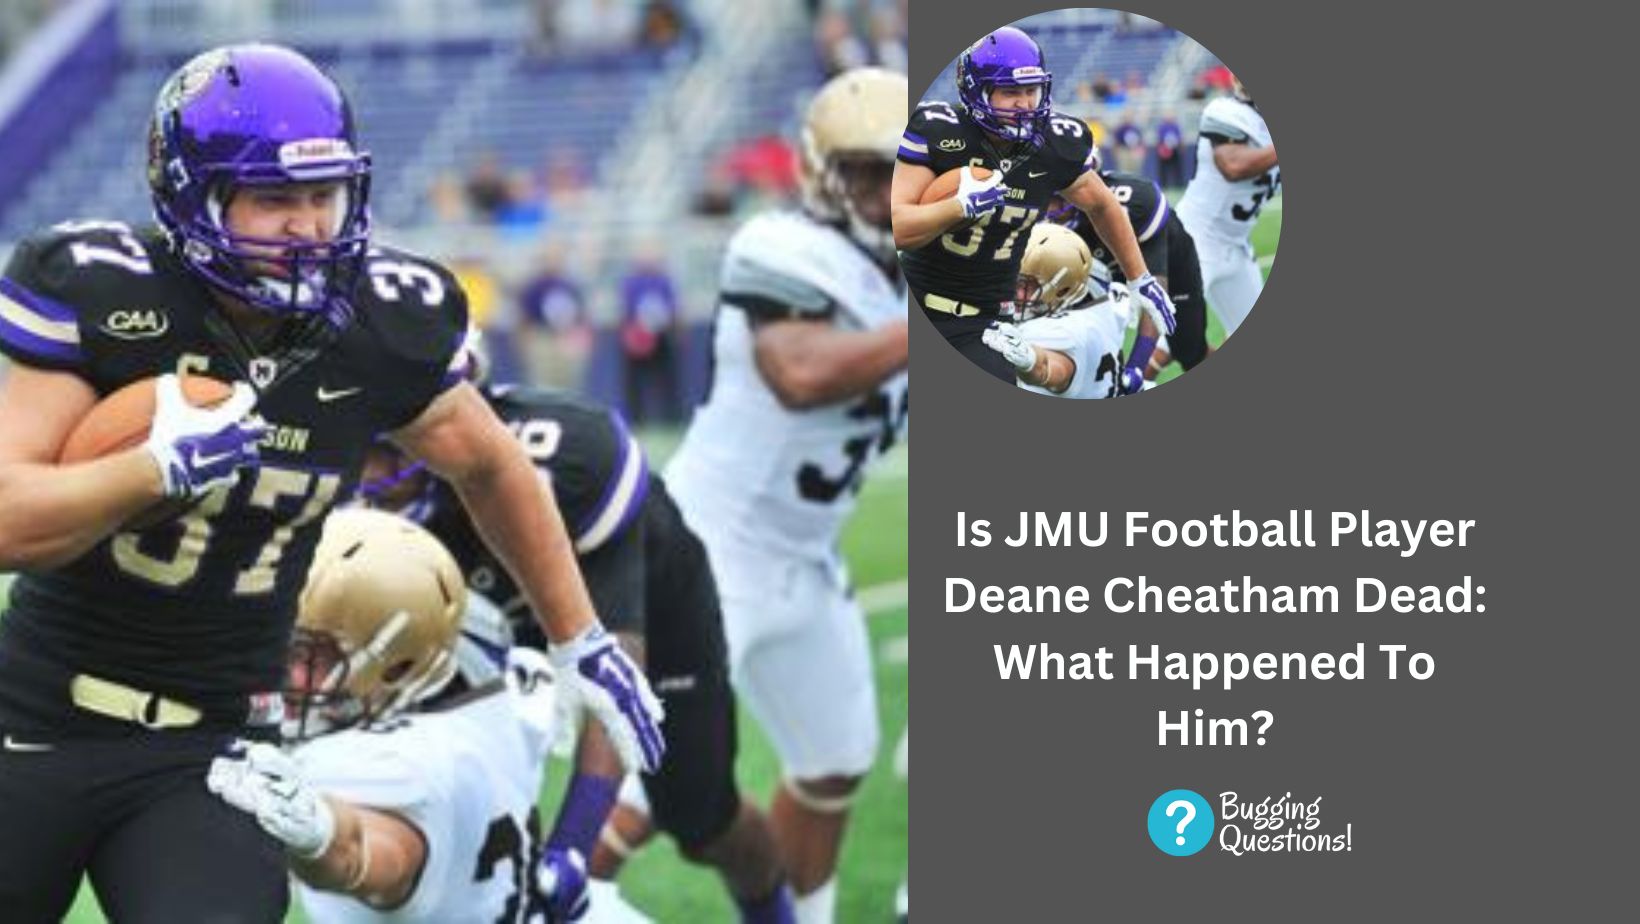 Is JMU Football Player Deane Cheatham Dead: What Happened To Him?